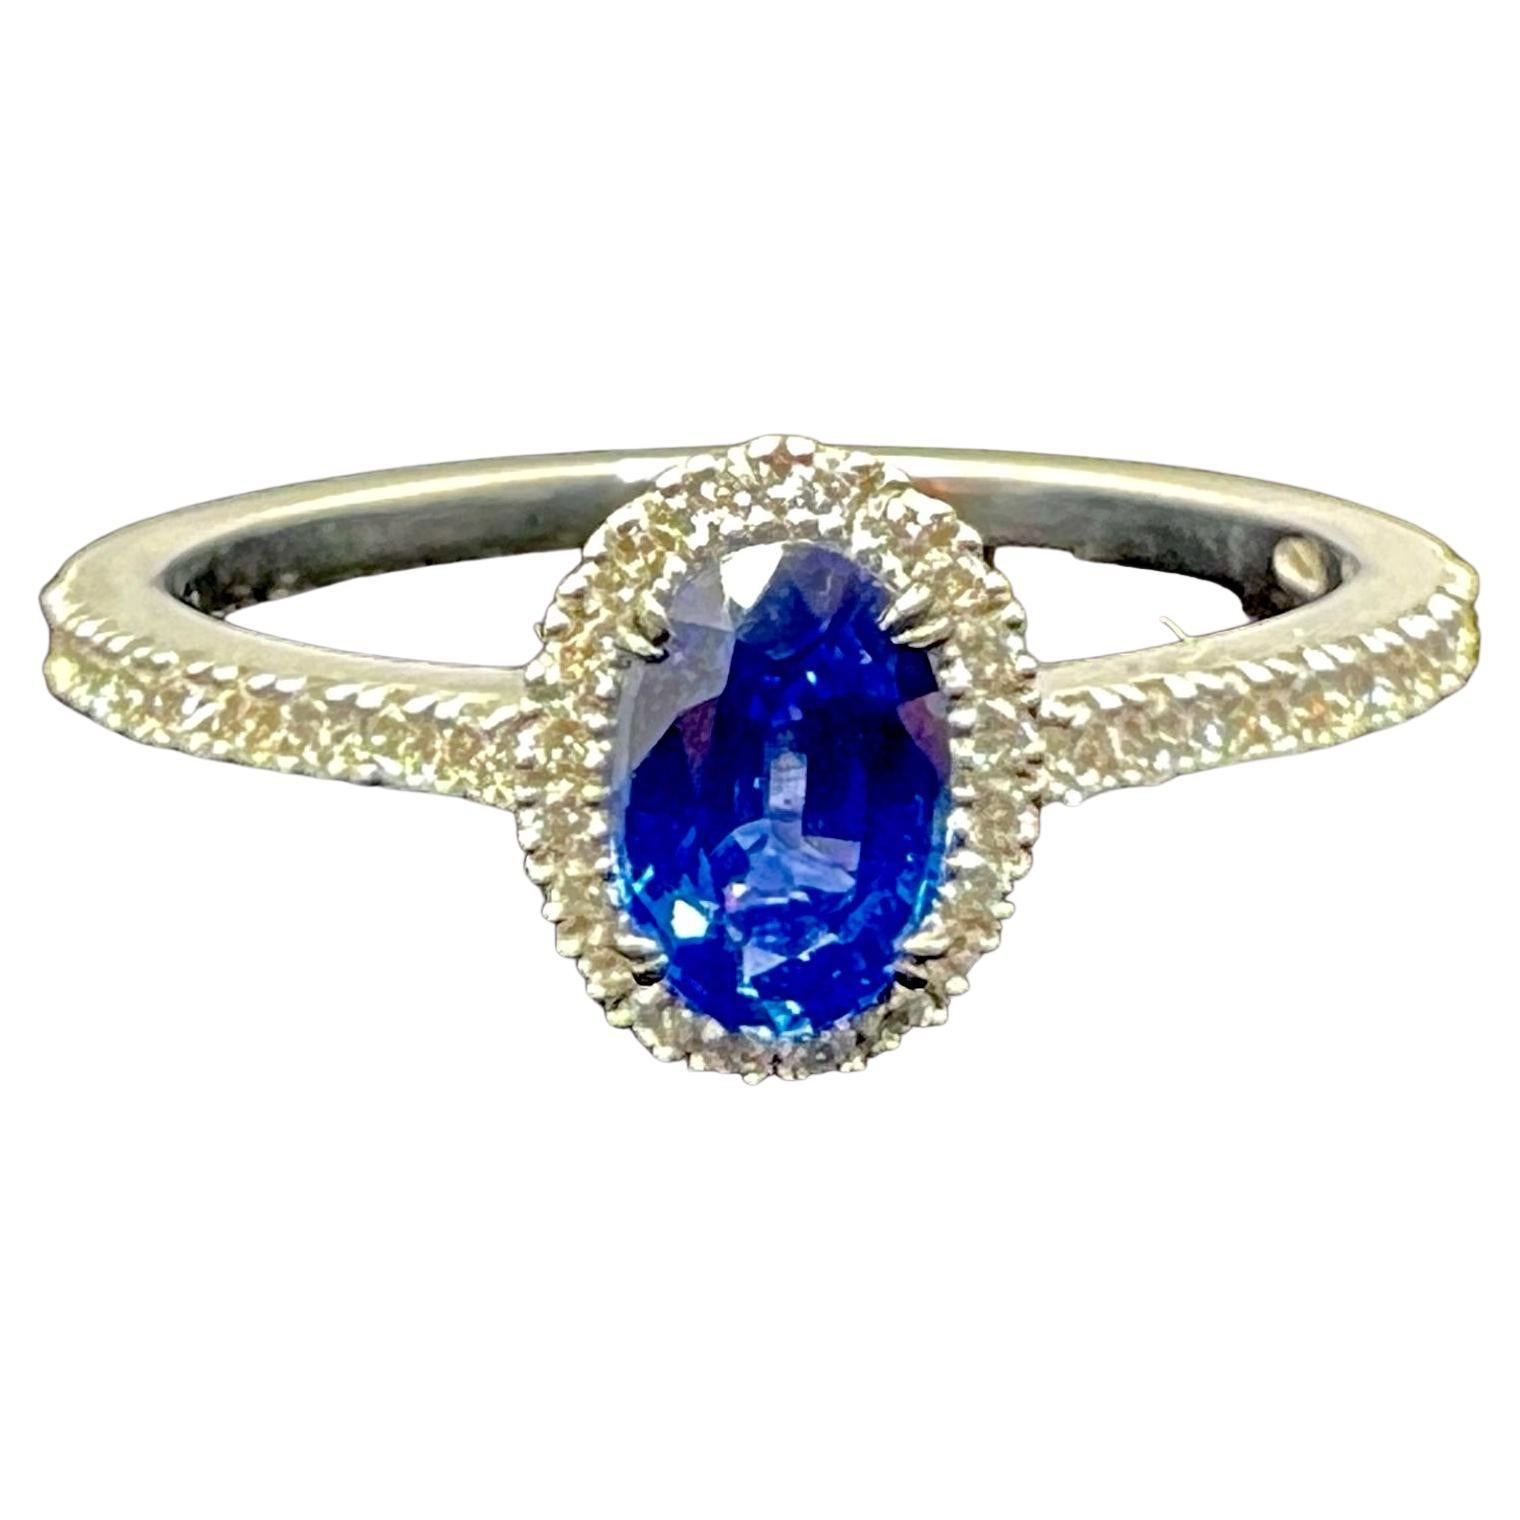 18-carat gold ring set with a sapphire surrounded by brilliants